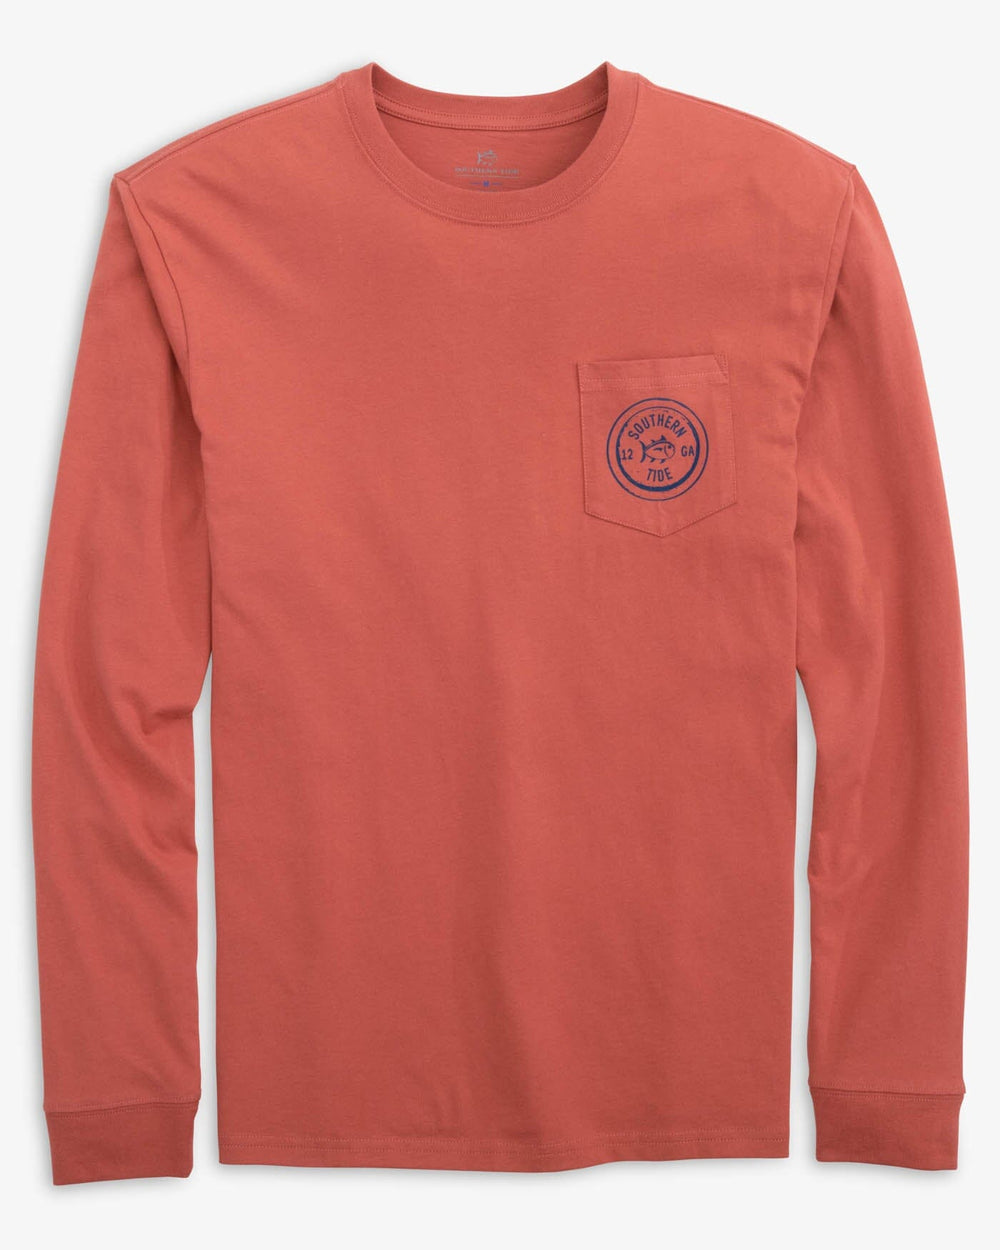 The front view of the Southern Tide Have A Pheasant Day Long Sleeve T-Shirt by Southern Tide - Dusty Coral